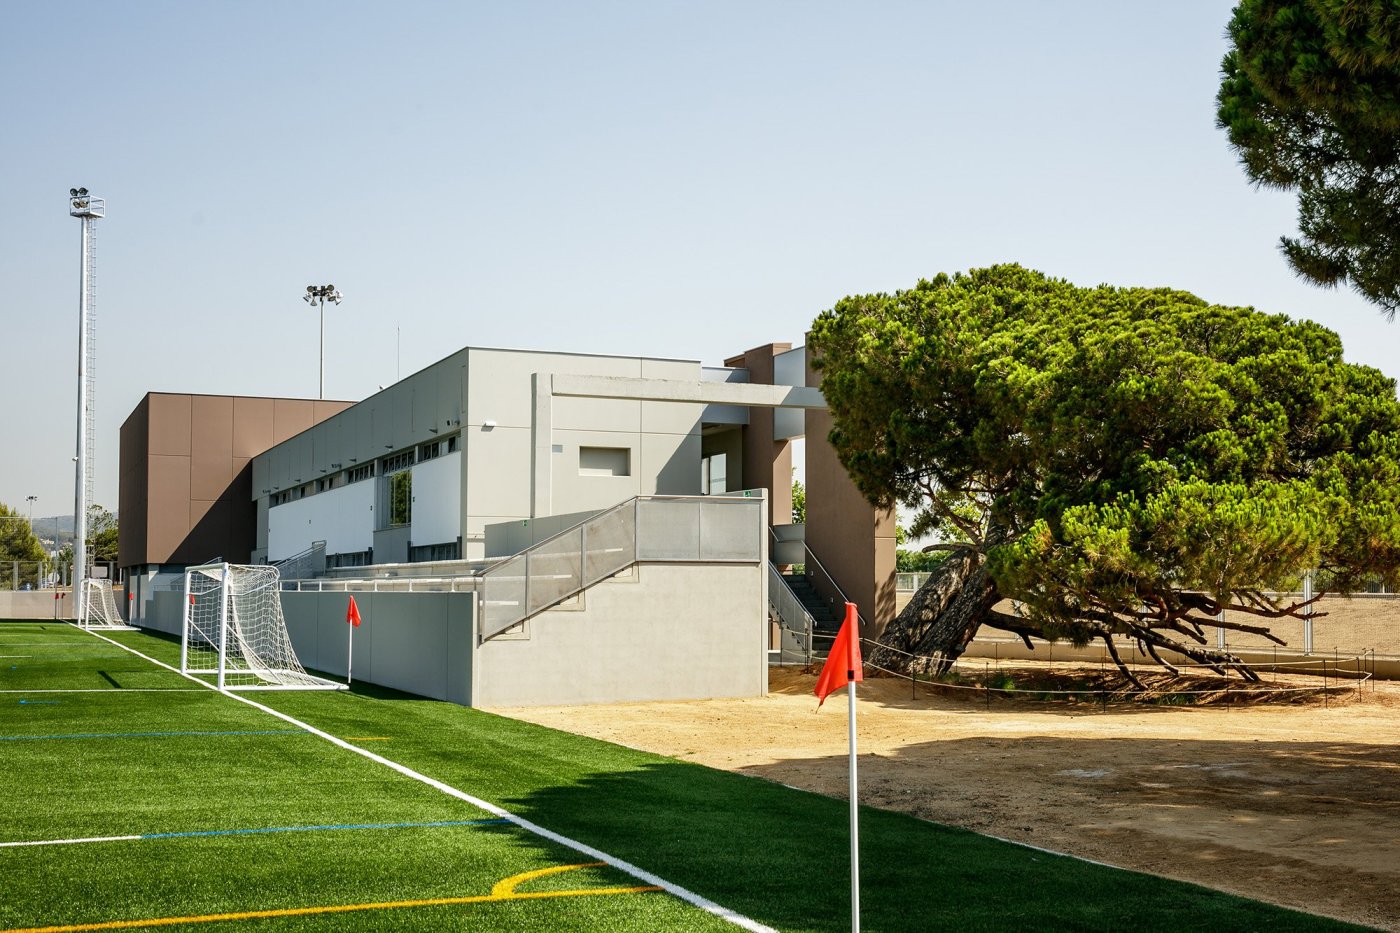 bsb-rugby-football-sports-stadium-castelldefels (10)